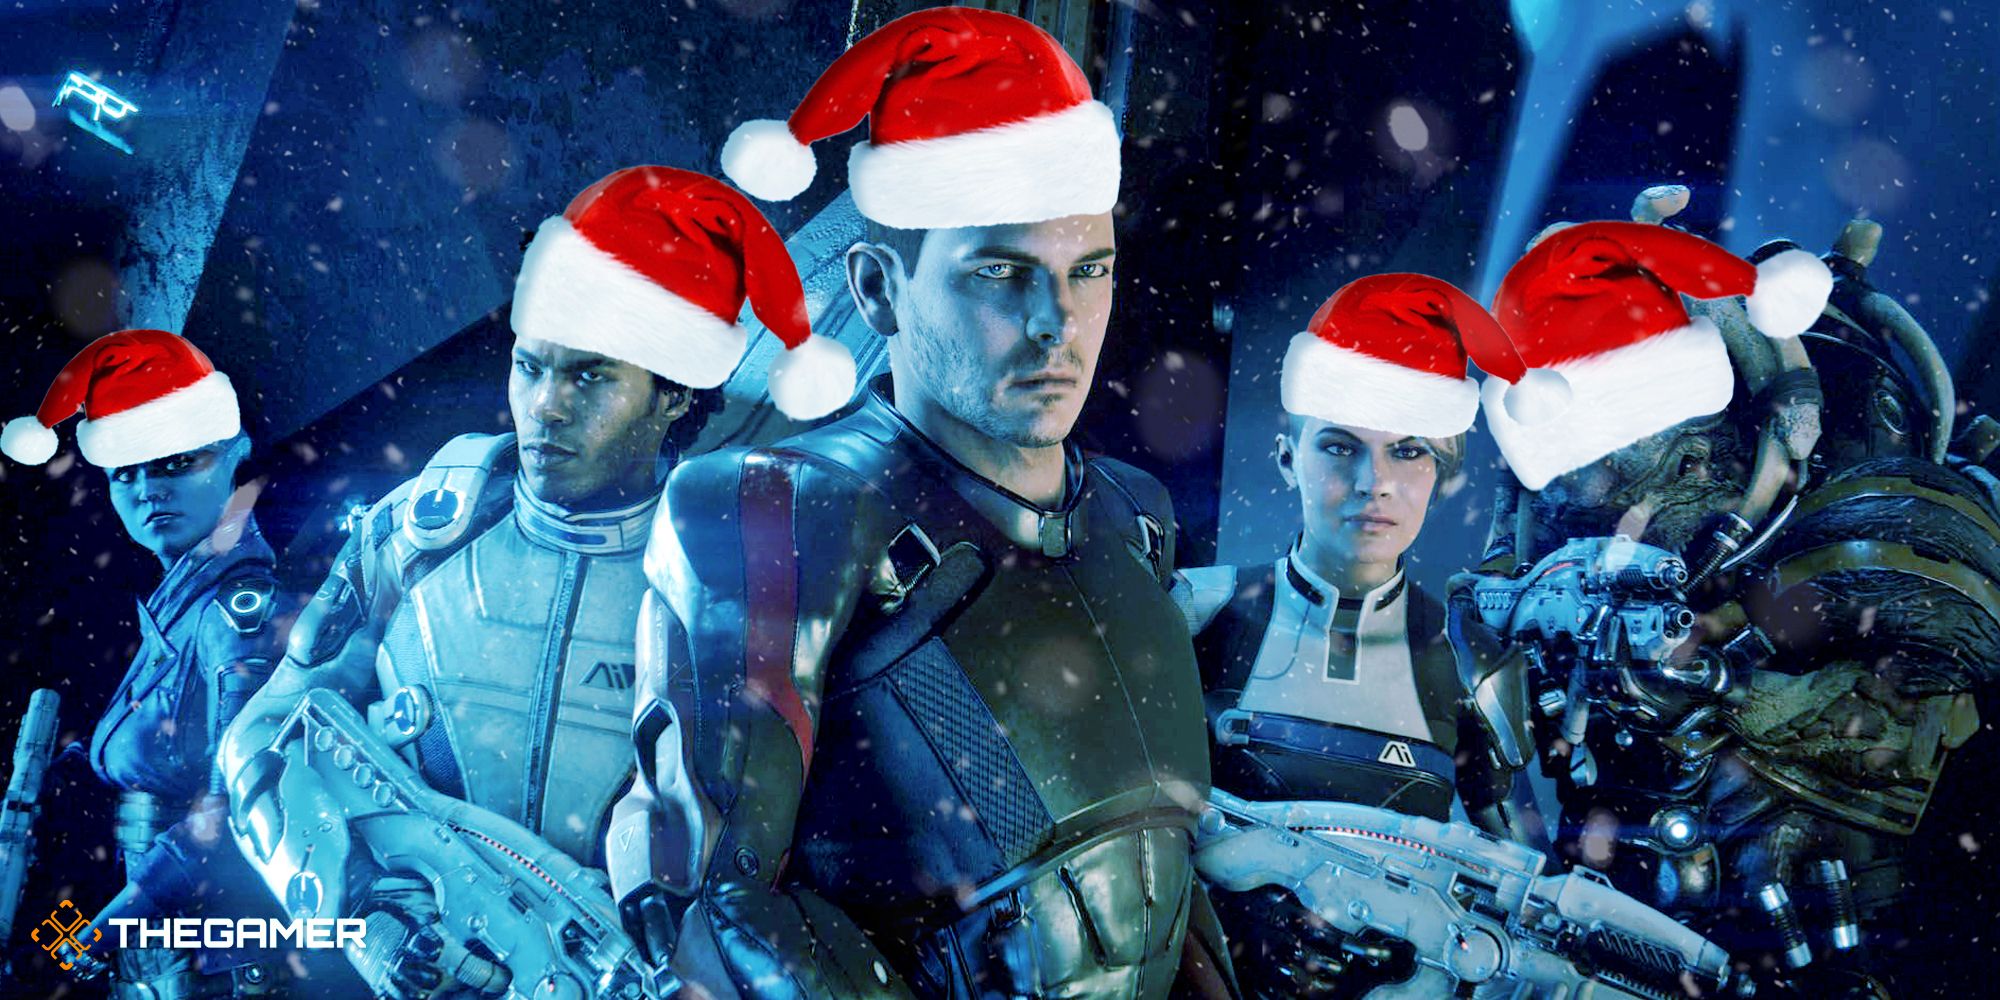 Mass Effect characters in Santa hats